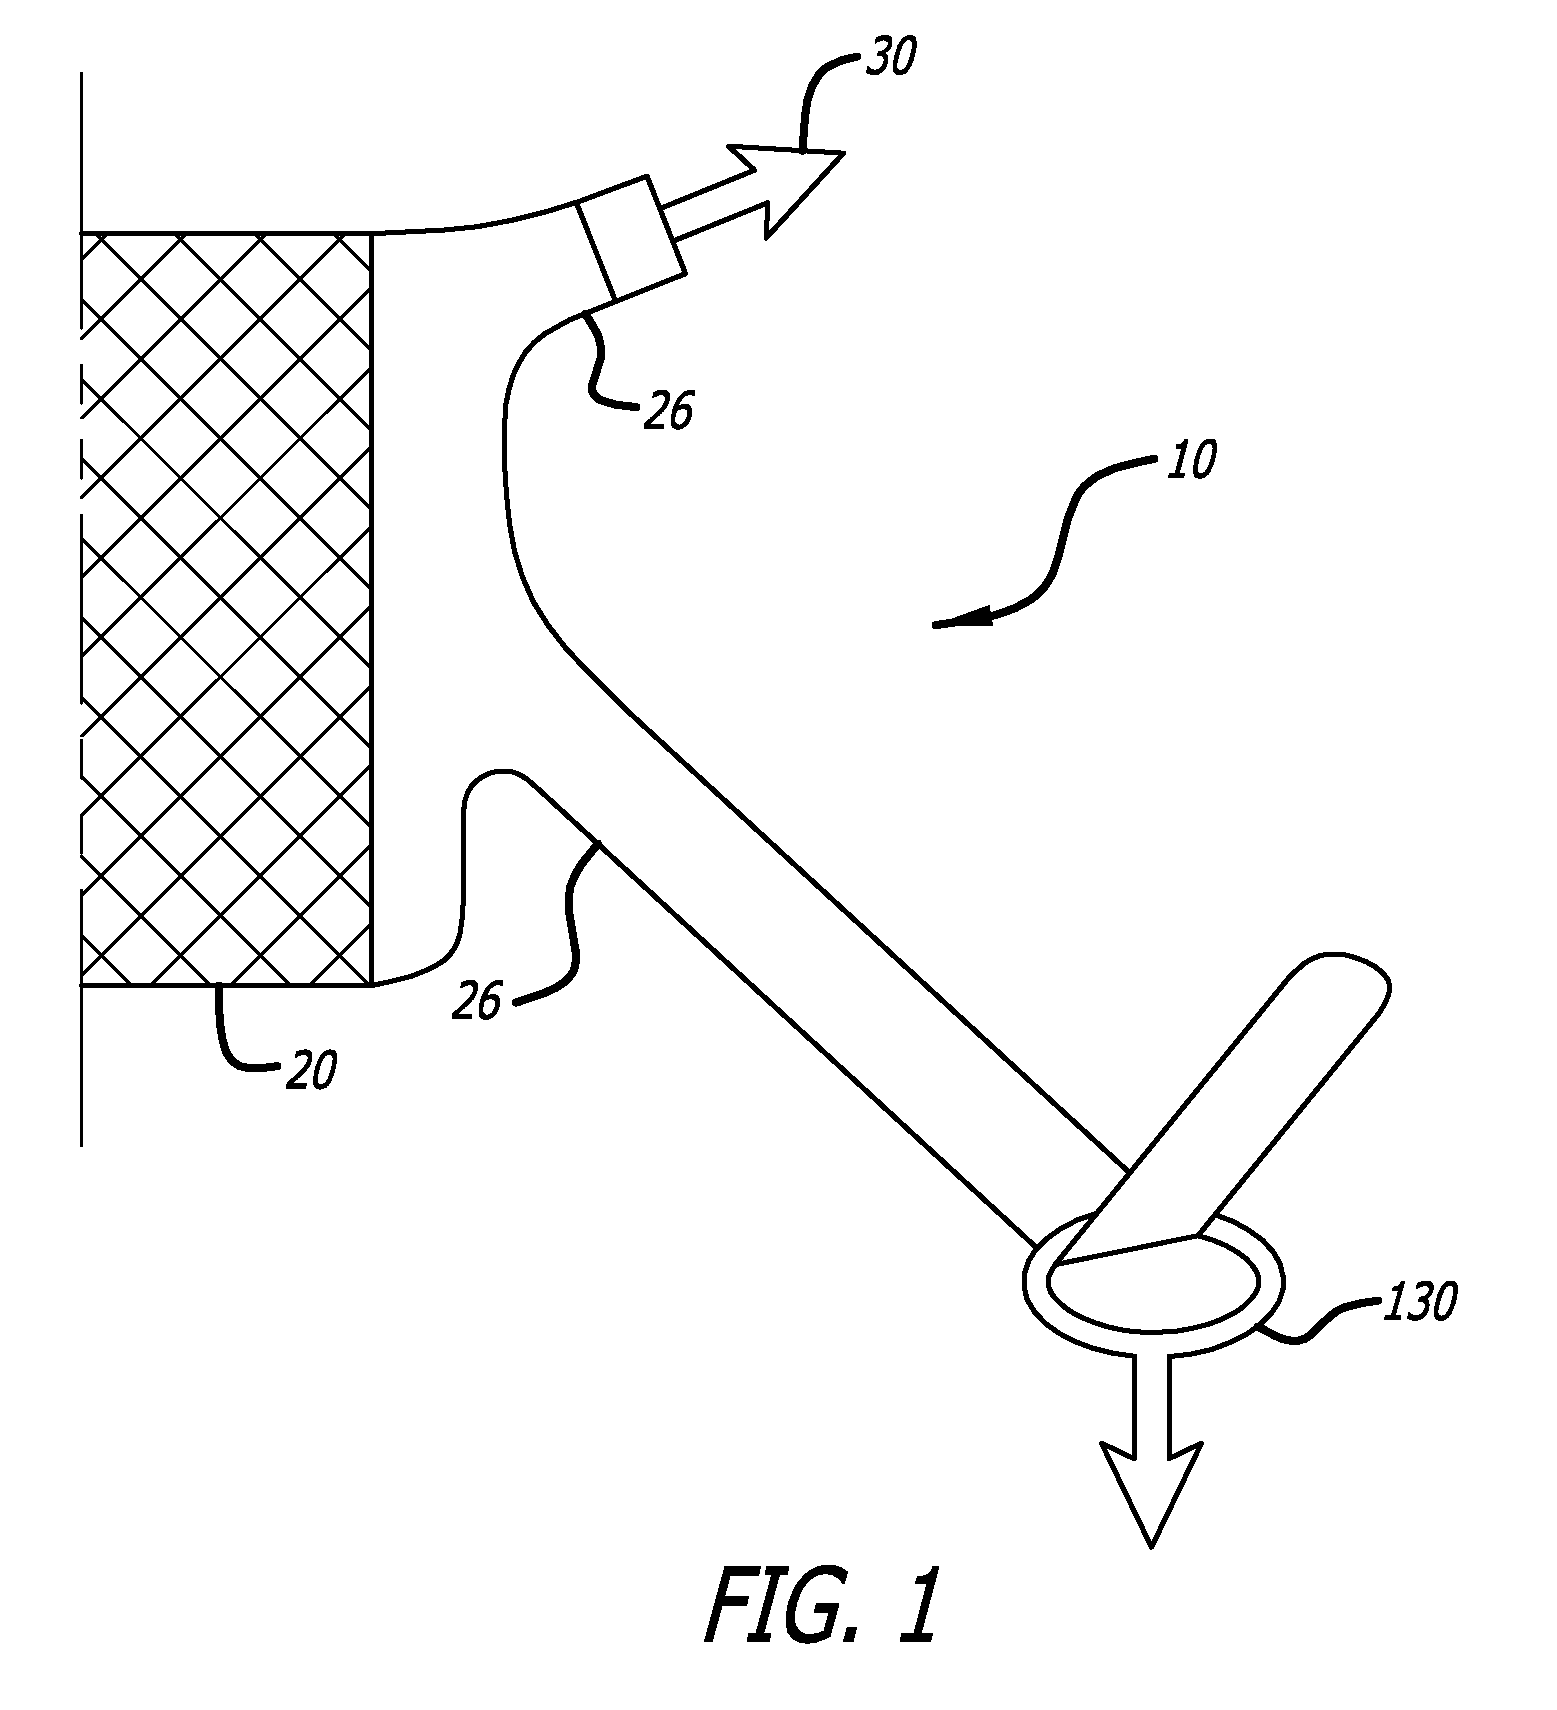 Implants And Procedures For Supporting Anatomical Structures For Treating Conditions Such As Pelvic Organ Prolapse